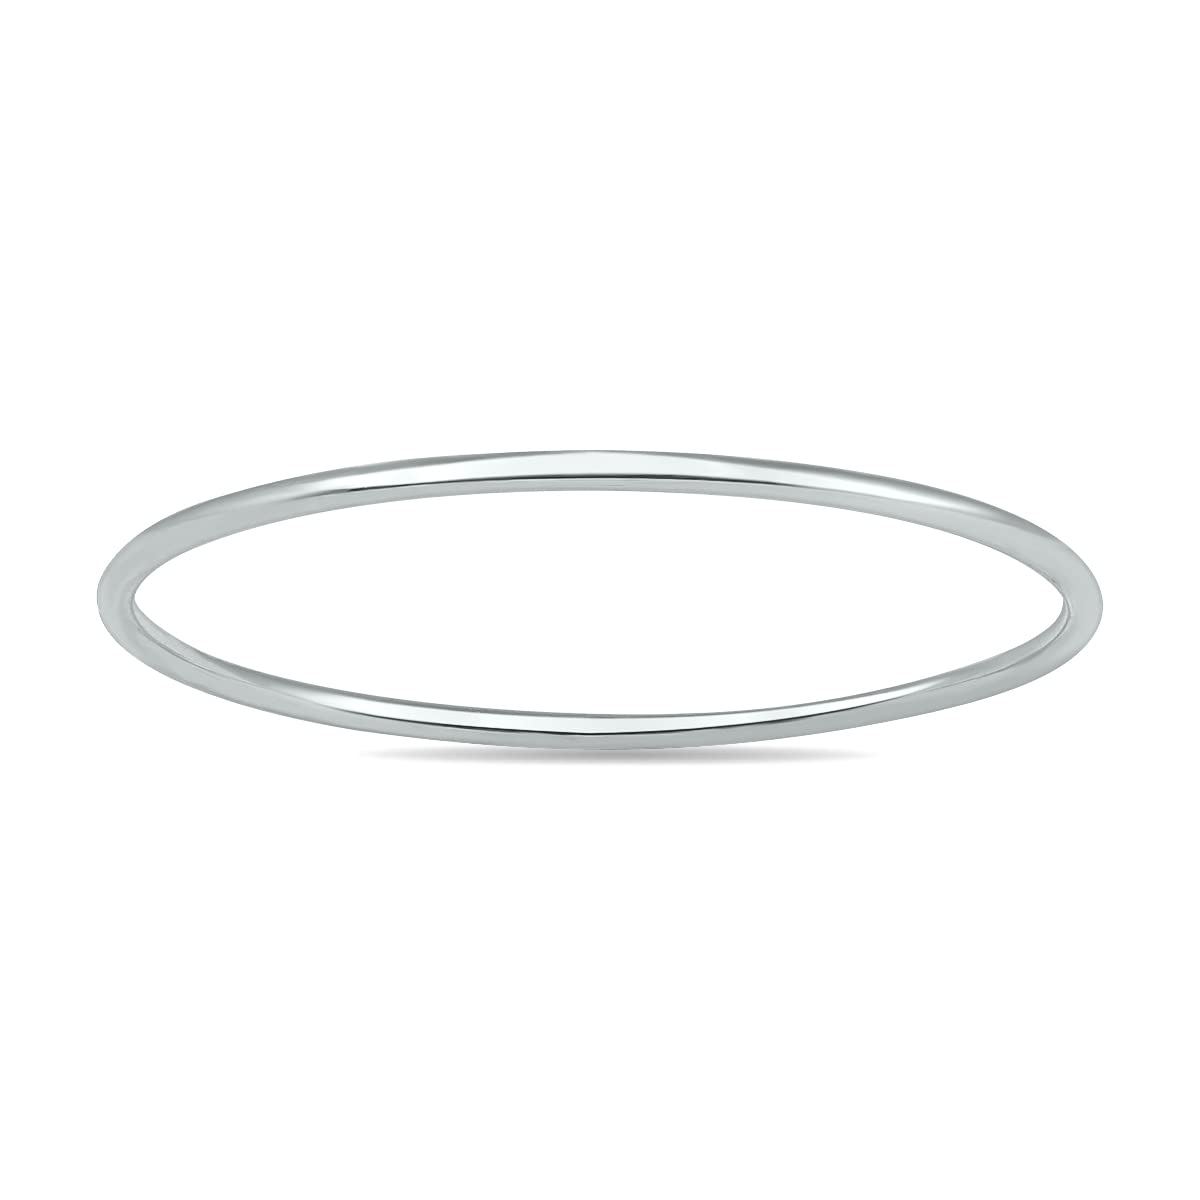 Skinny Thin Domed Stackable 14K Yellow Gold Band (.75 mm) - Also Available in 14K White Gold